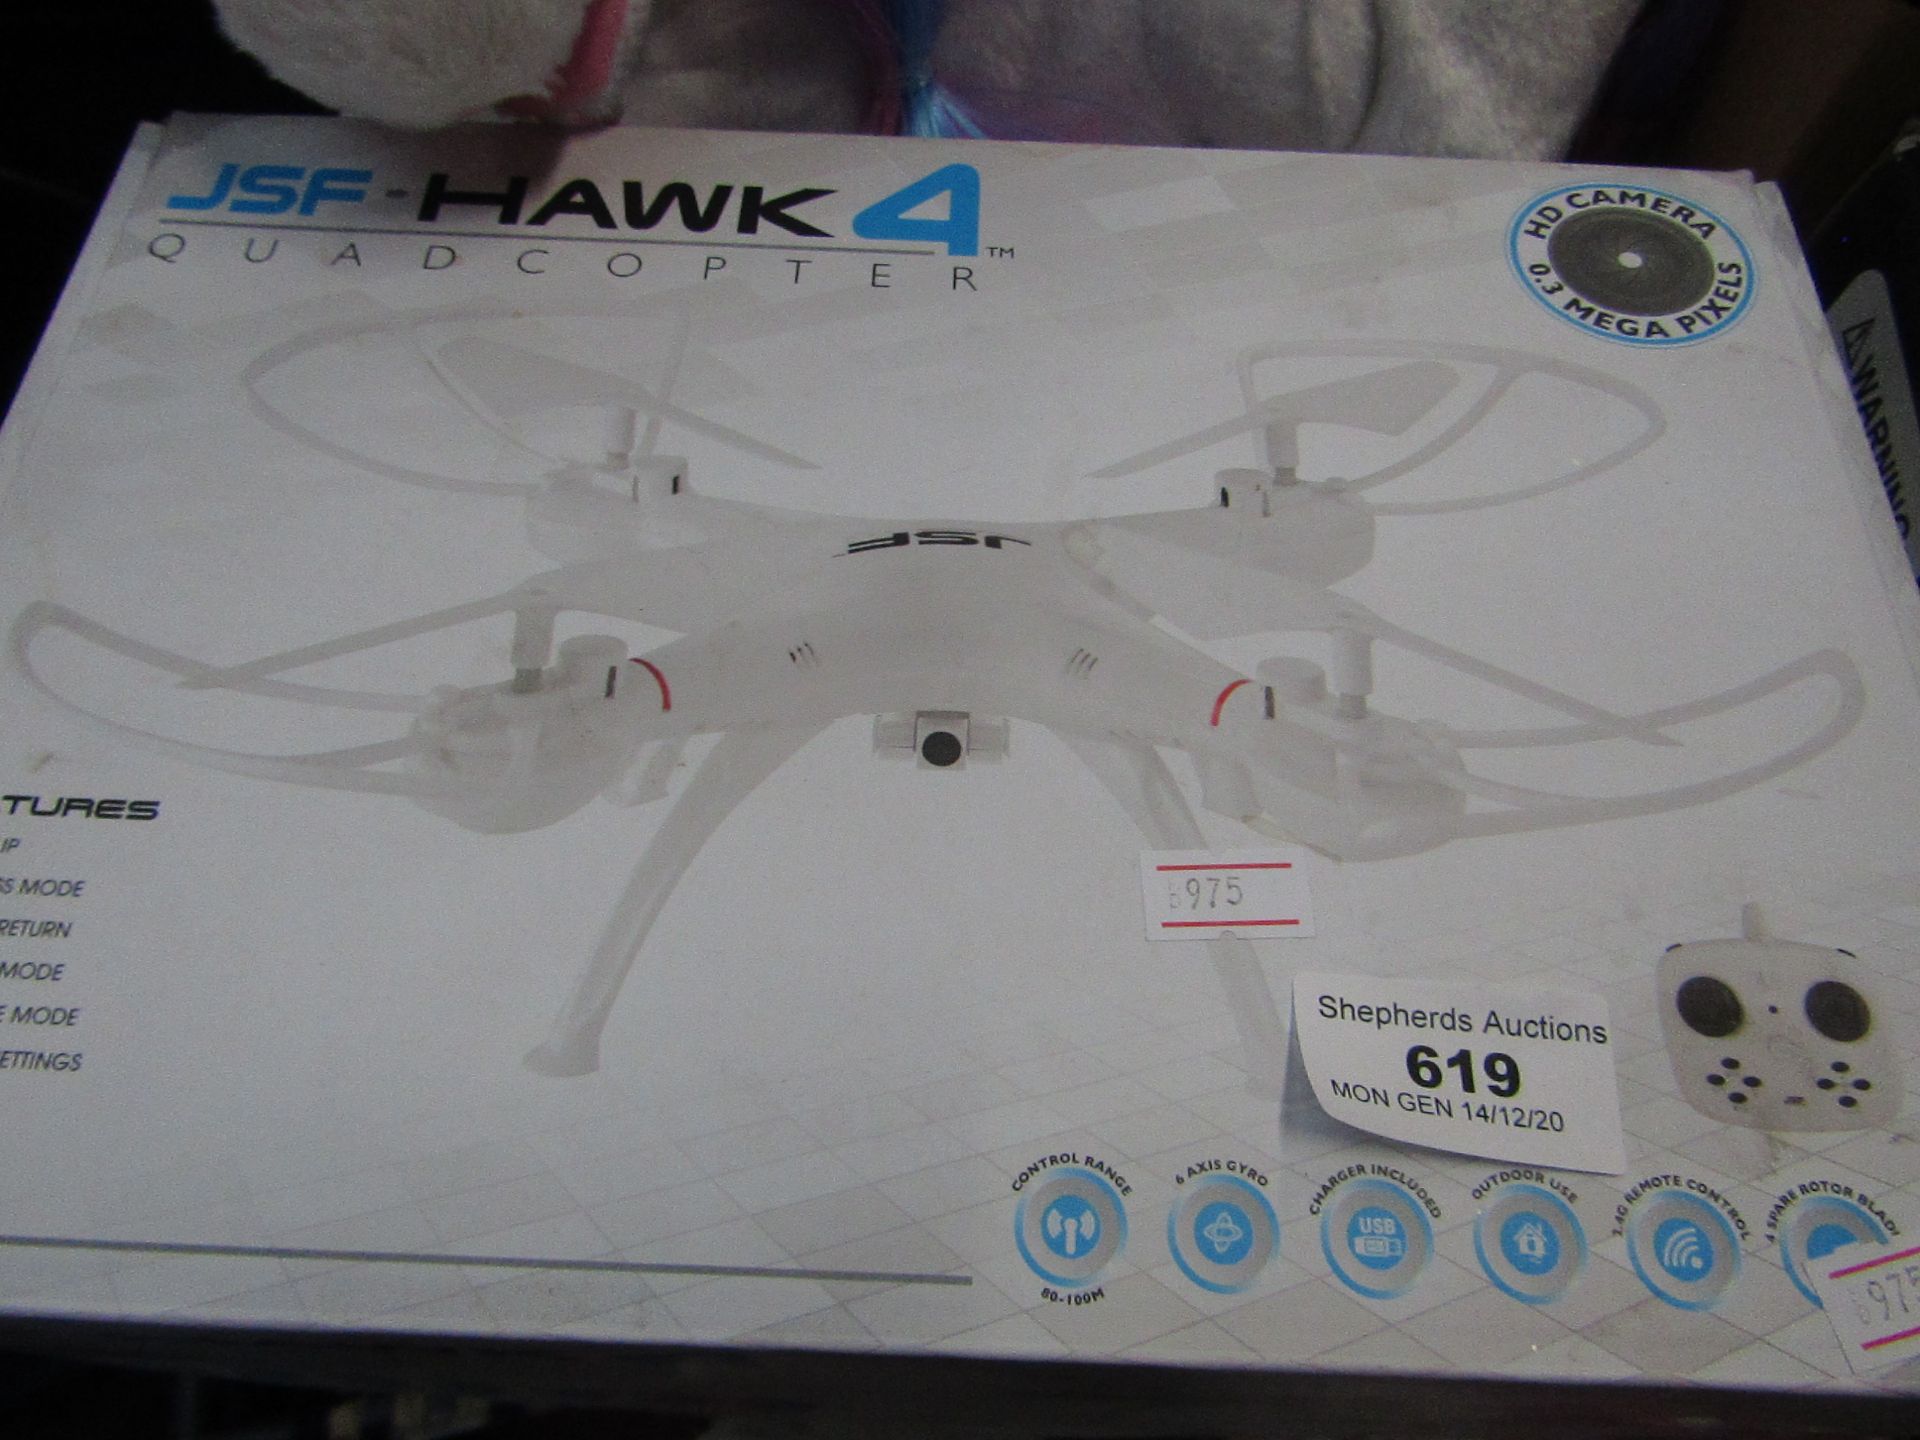 JSF Hawk 4 Quadcopter. Boxed but untested